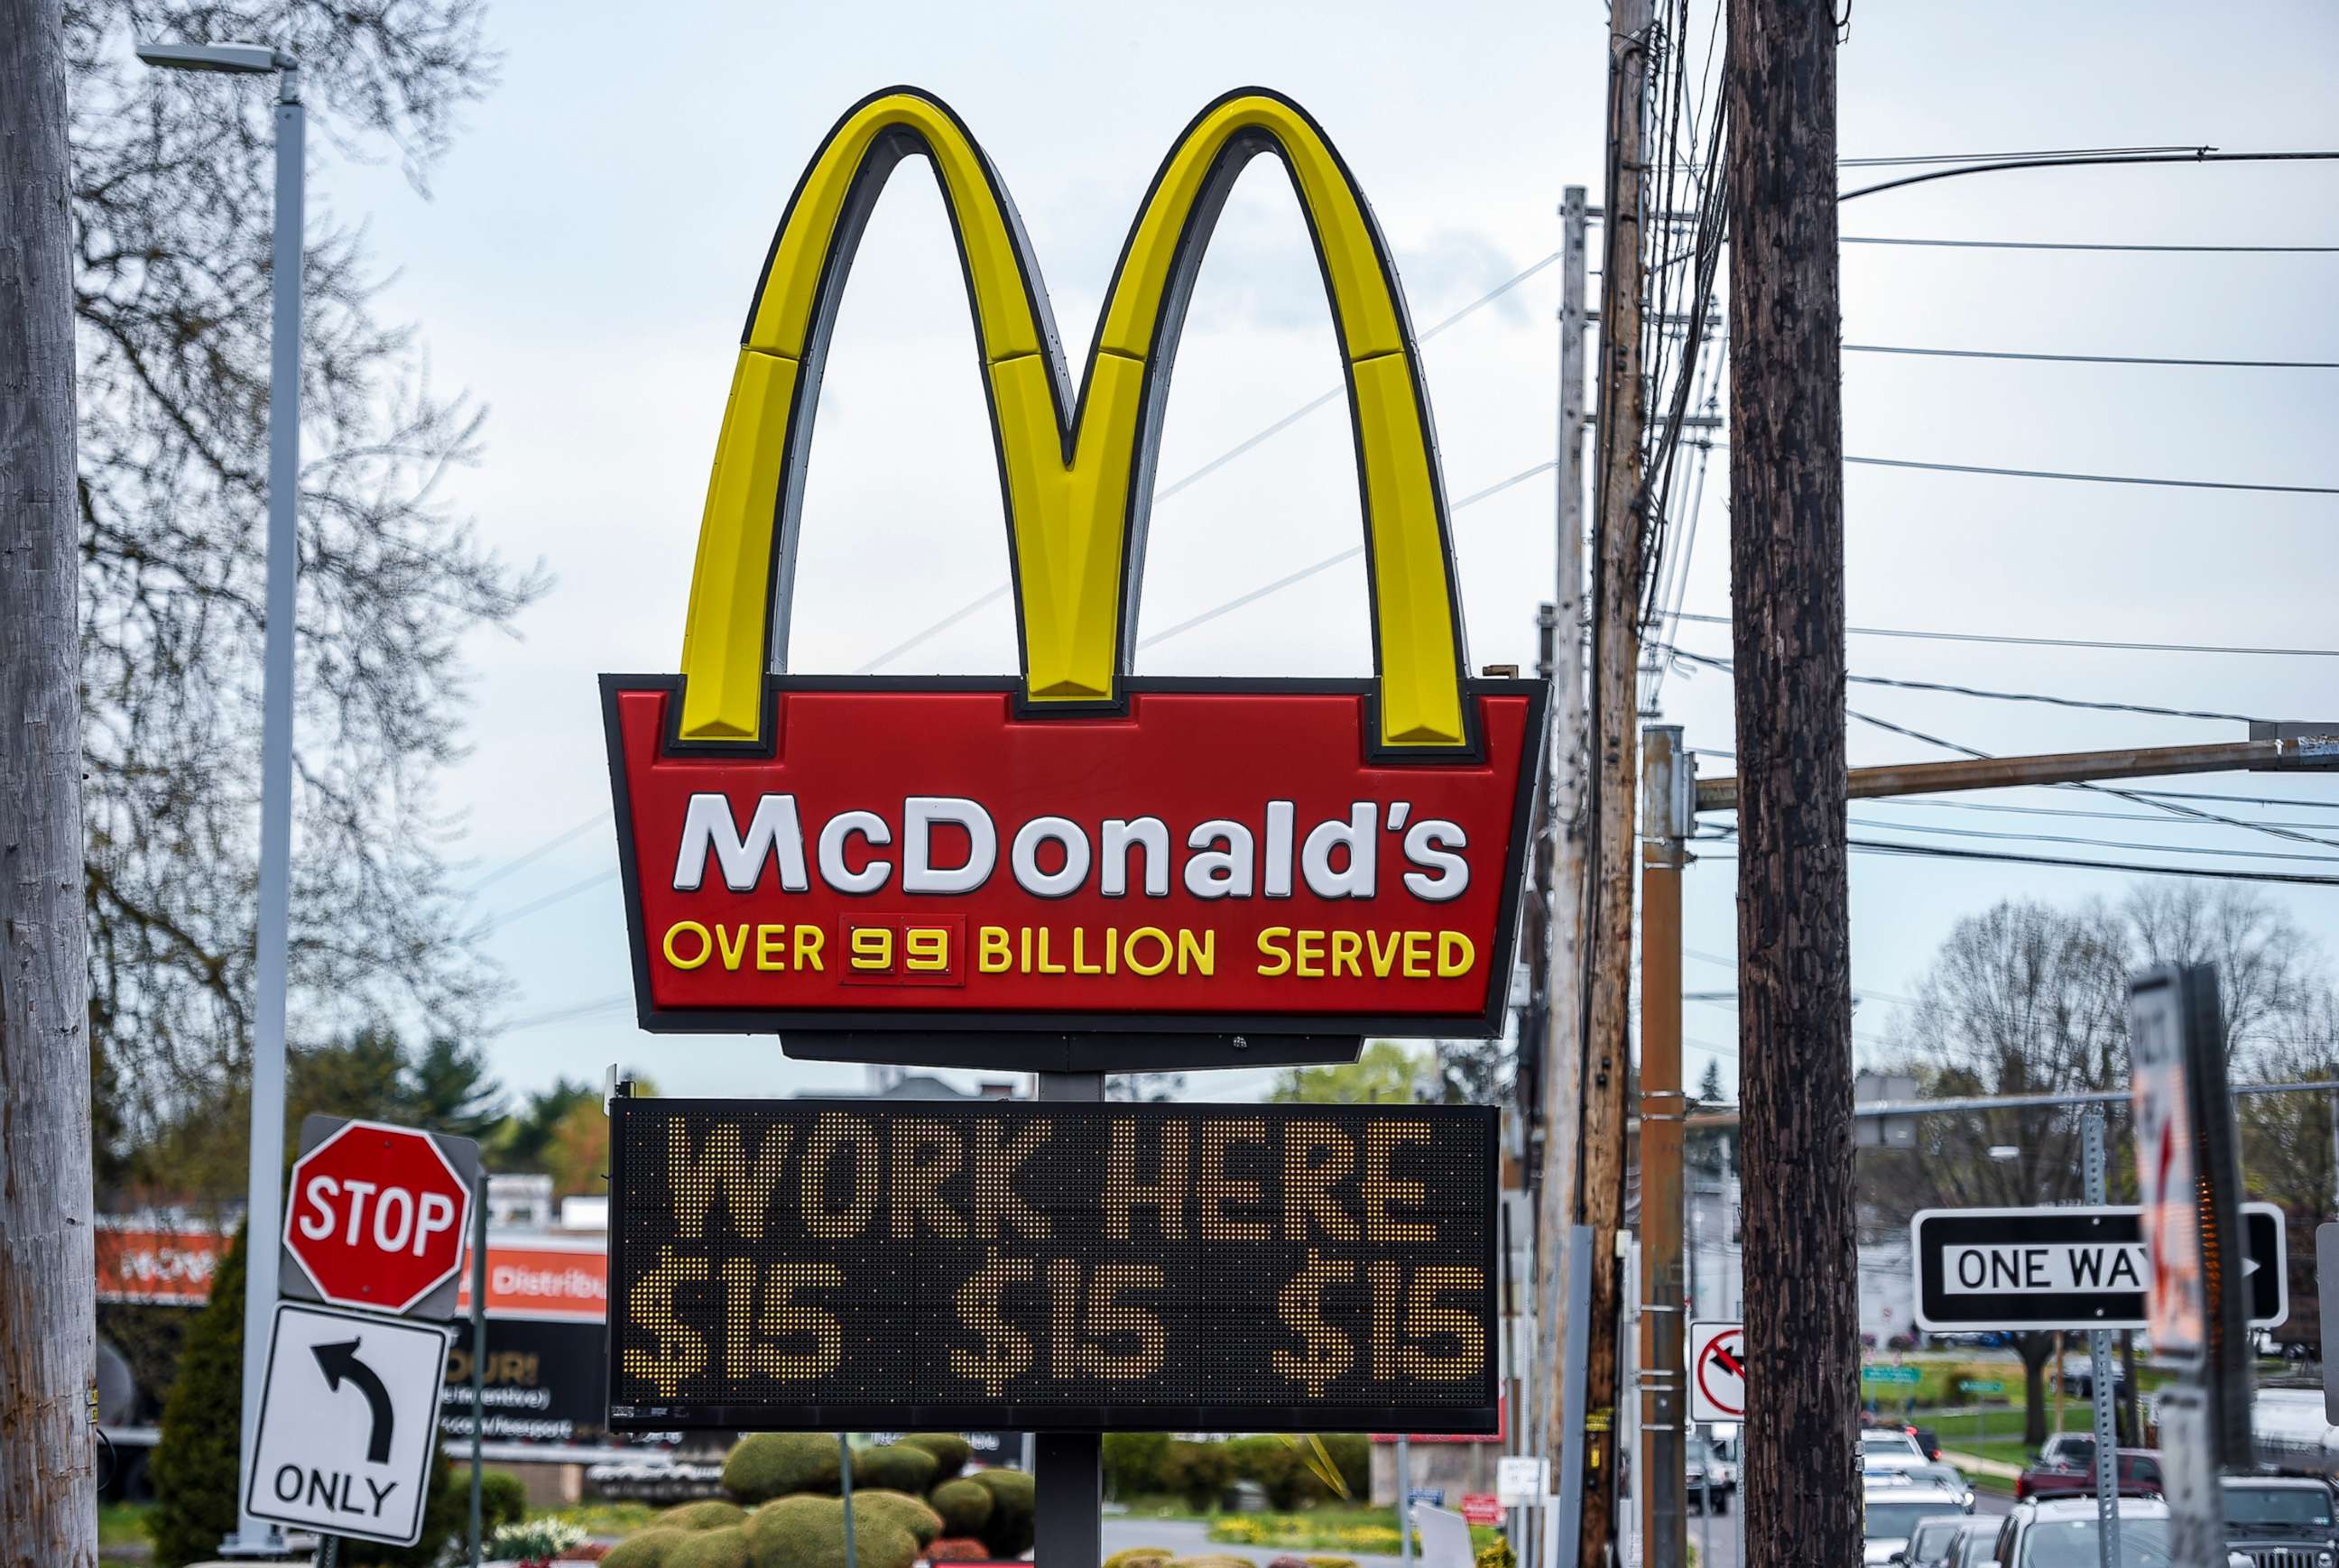 PHOTO: In this April 19, 2021, the sign at the McDonald's restaurant on Penn Ave in Sinking Spring, Penn., advertises higher wages.